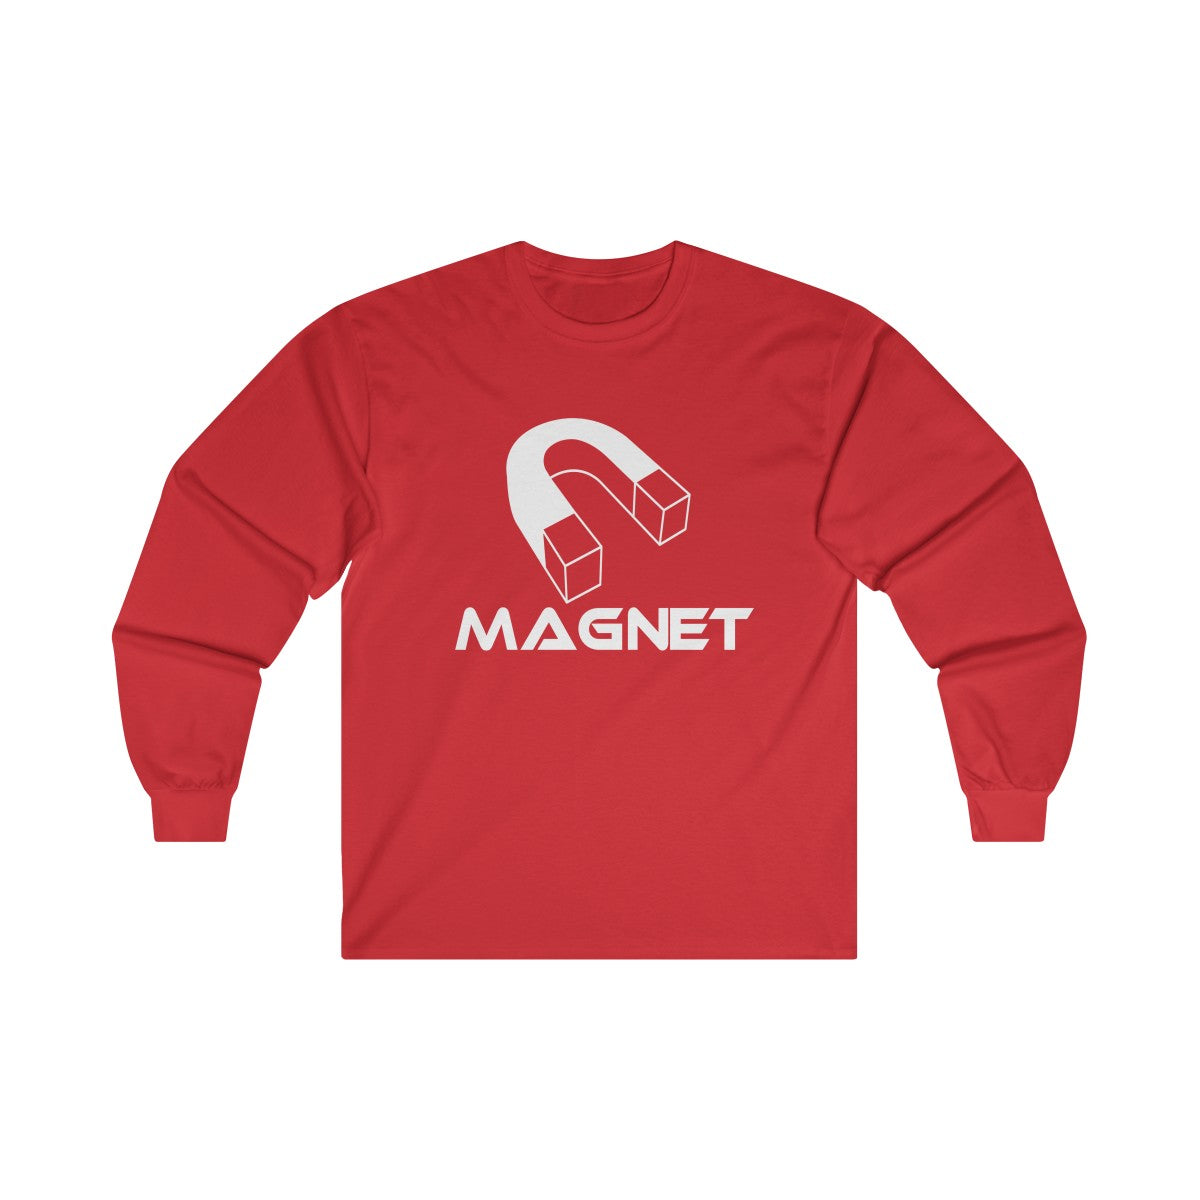 MAGNET Ultra Cotton Long Sleeve Tee xccscss.